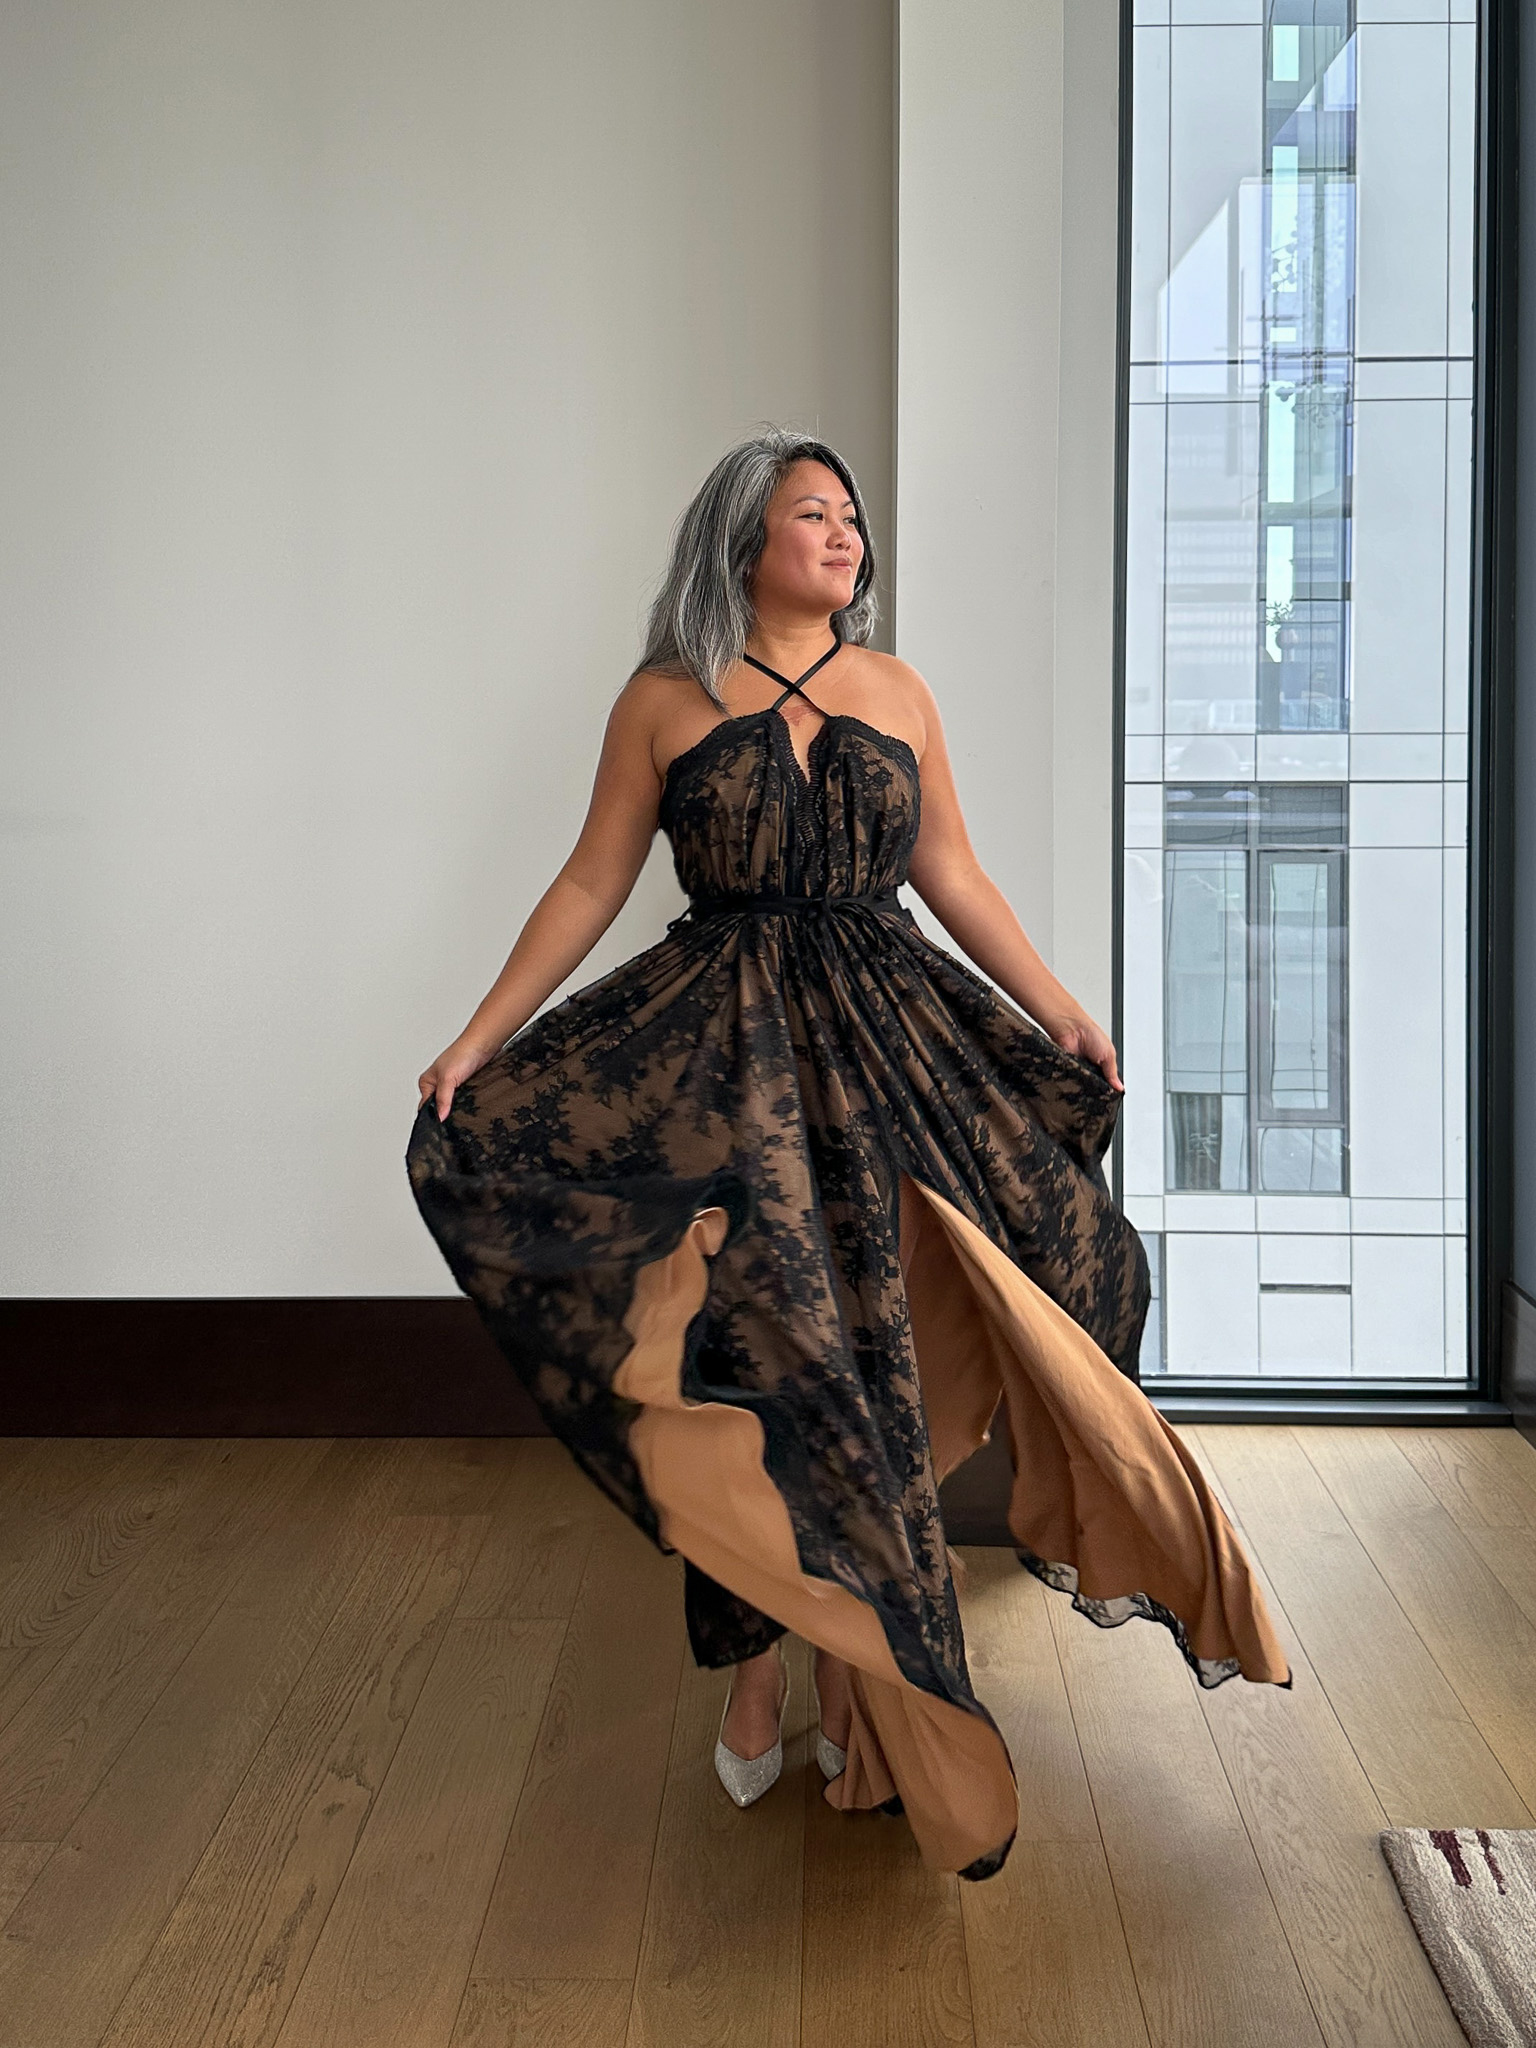 How to Wear the Michael Costello Paris Gown